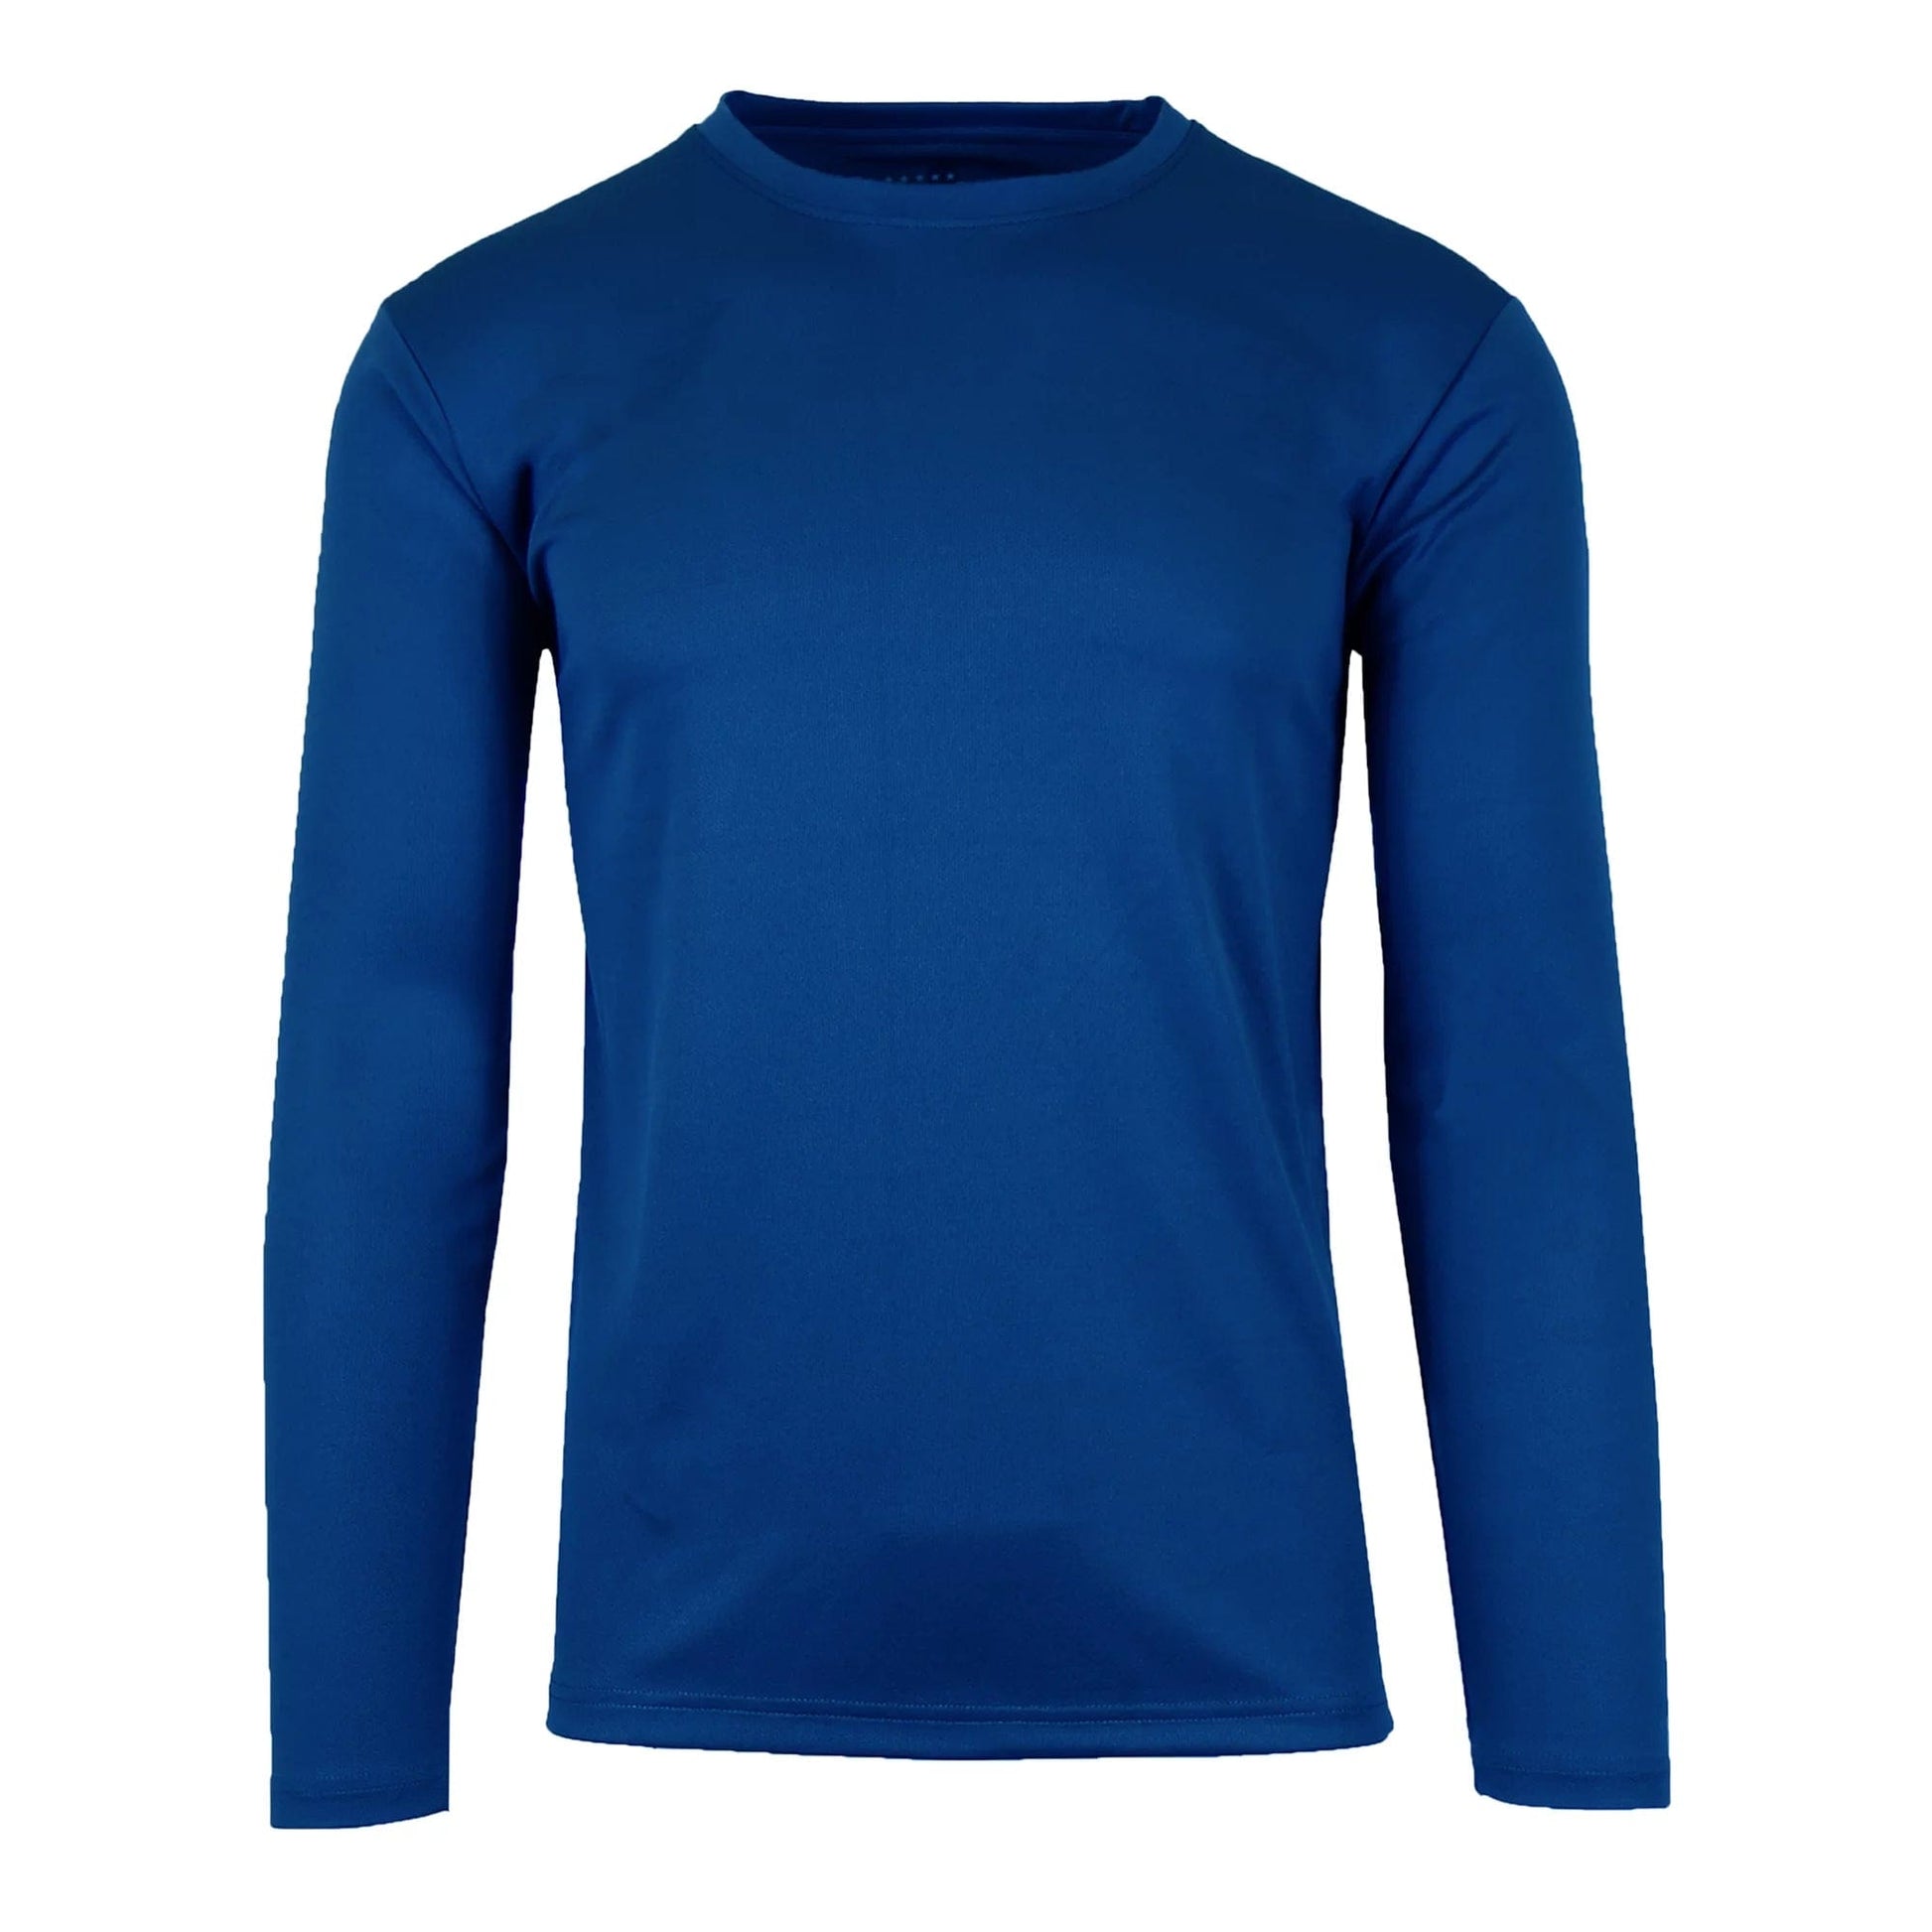 Men's Moisture Wicking Long Sleeve Performance Crew Neck Tagless Tee (Sizes, S-2XL) - GalaxybyHarvic